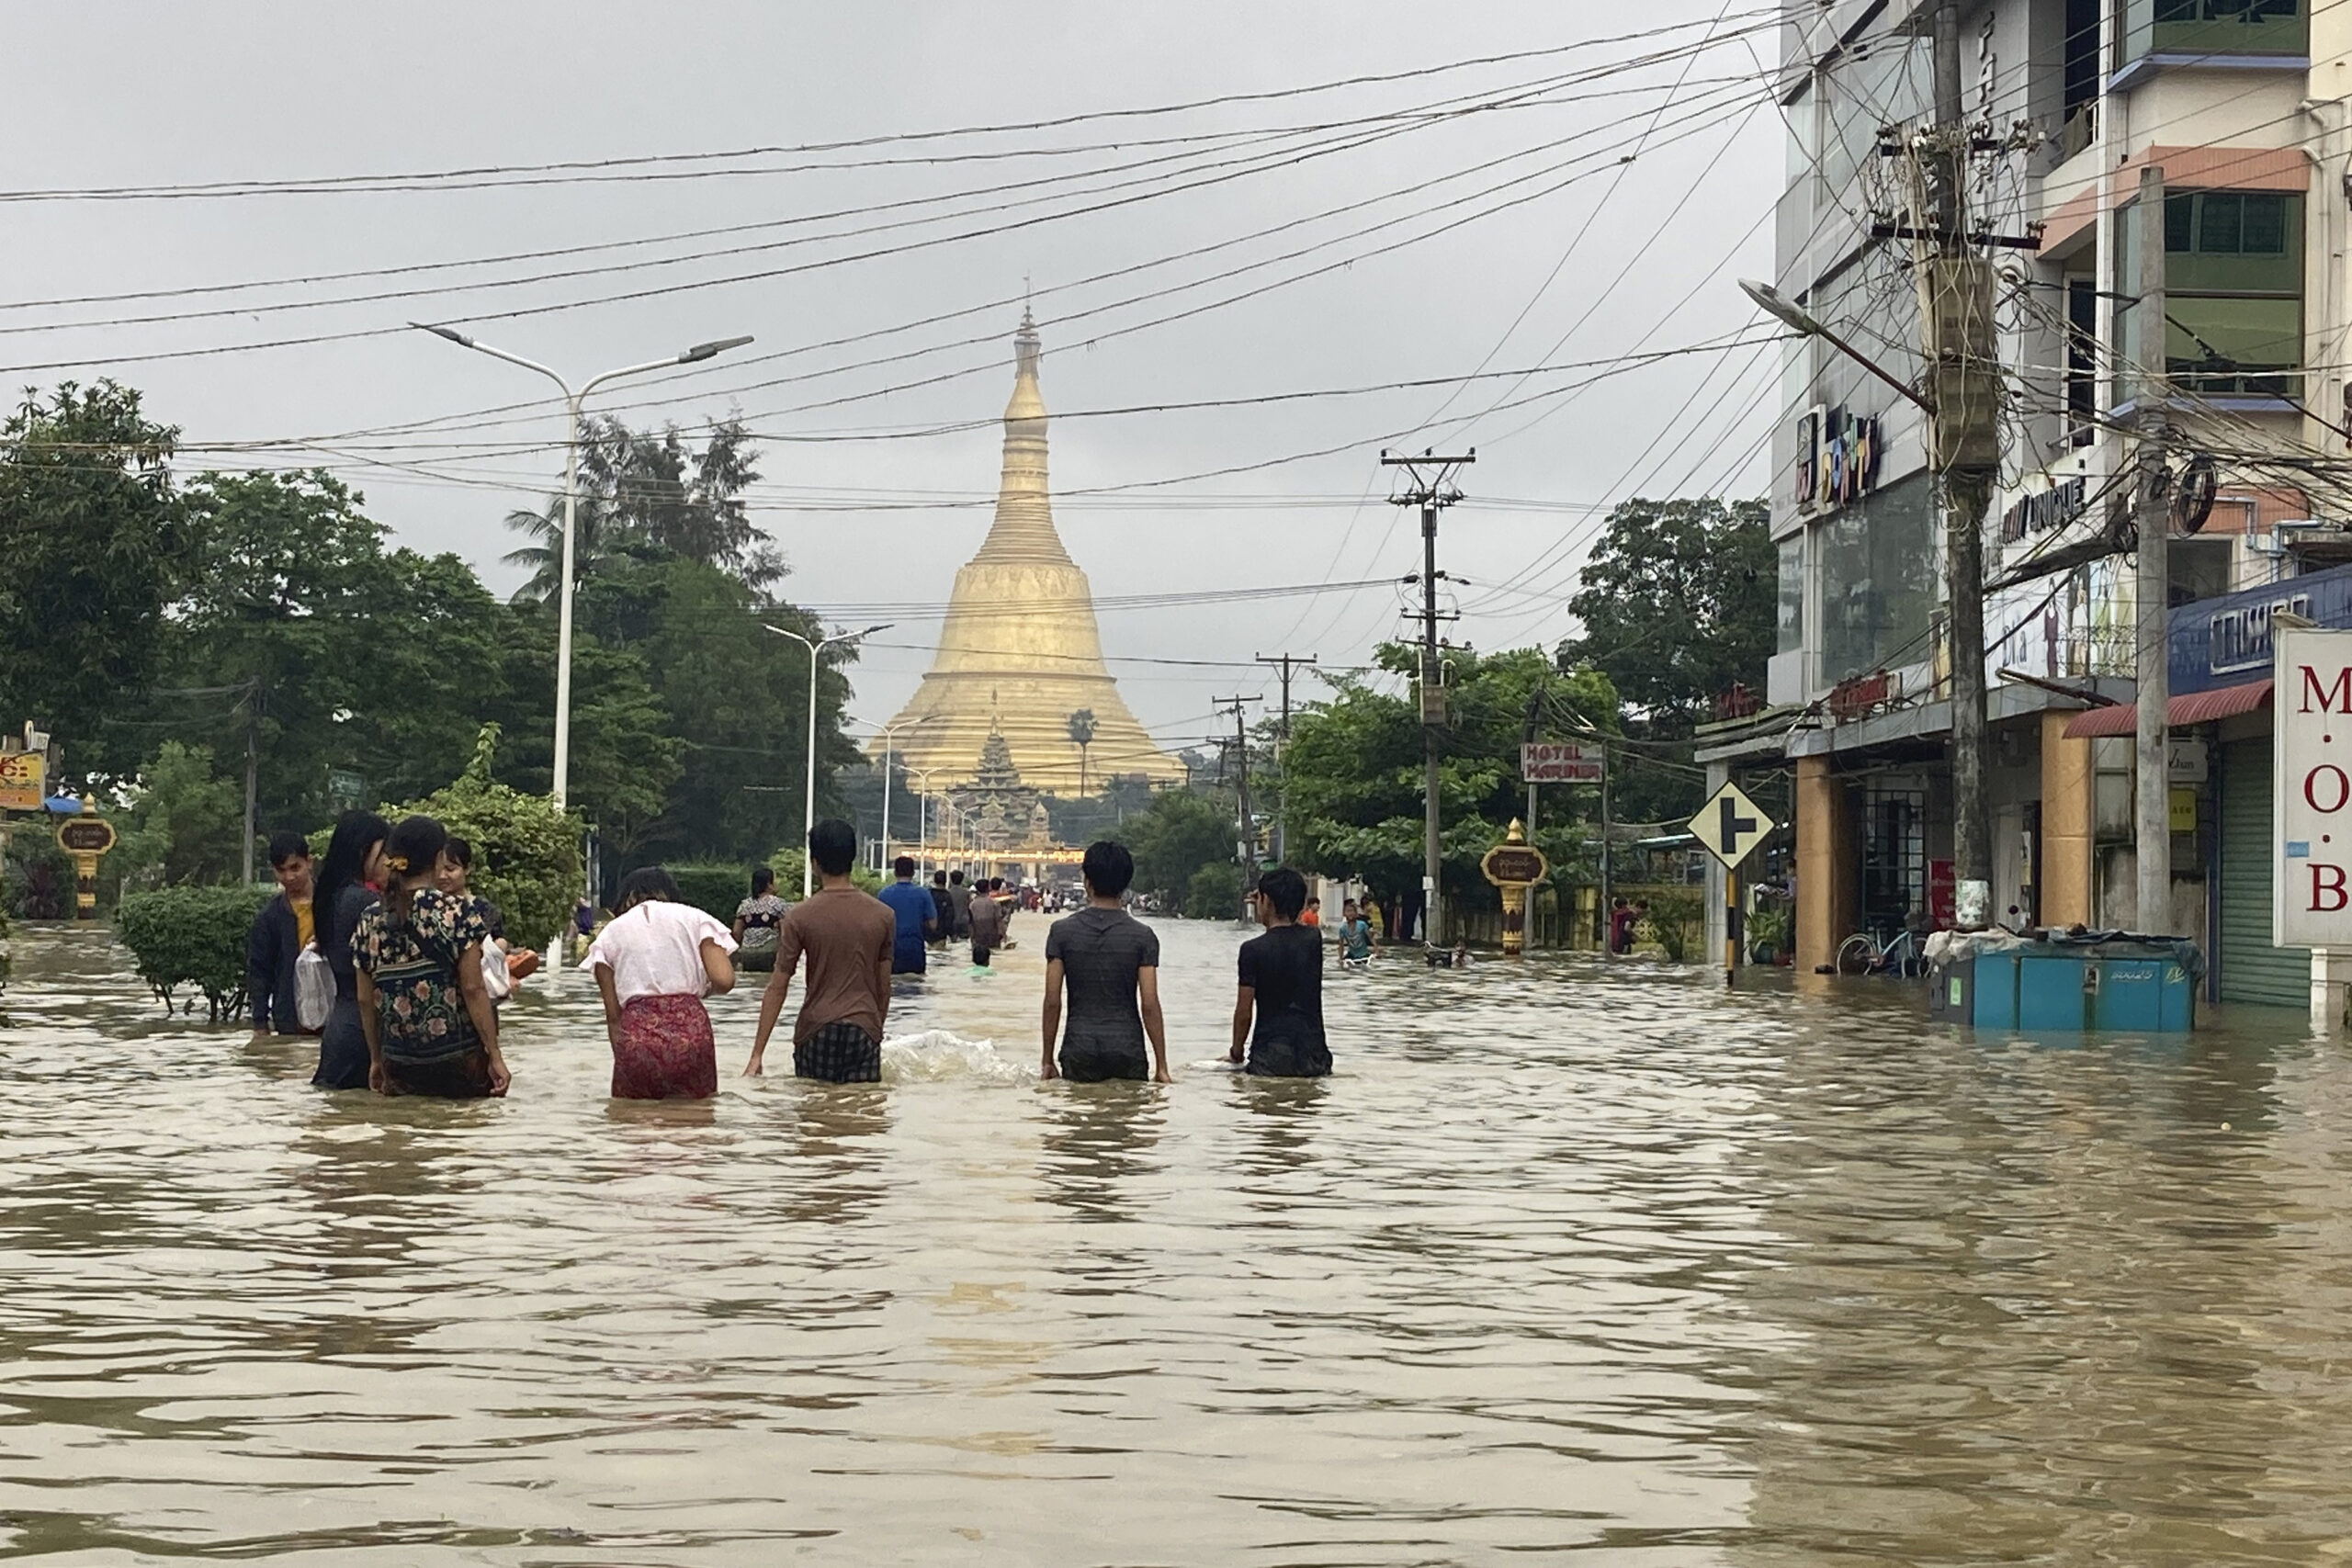 Over 130,000 people affected by floods in Myanmar